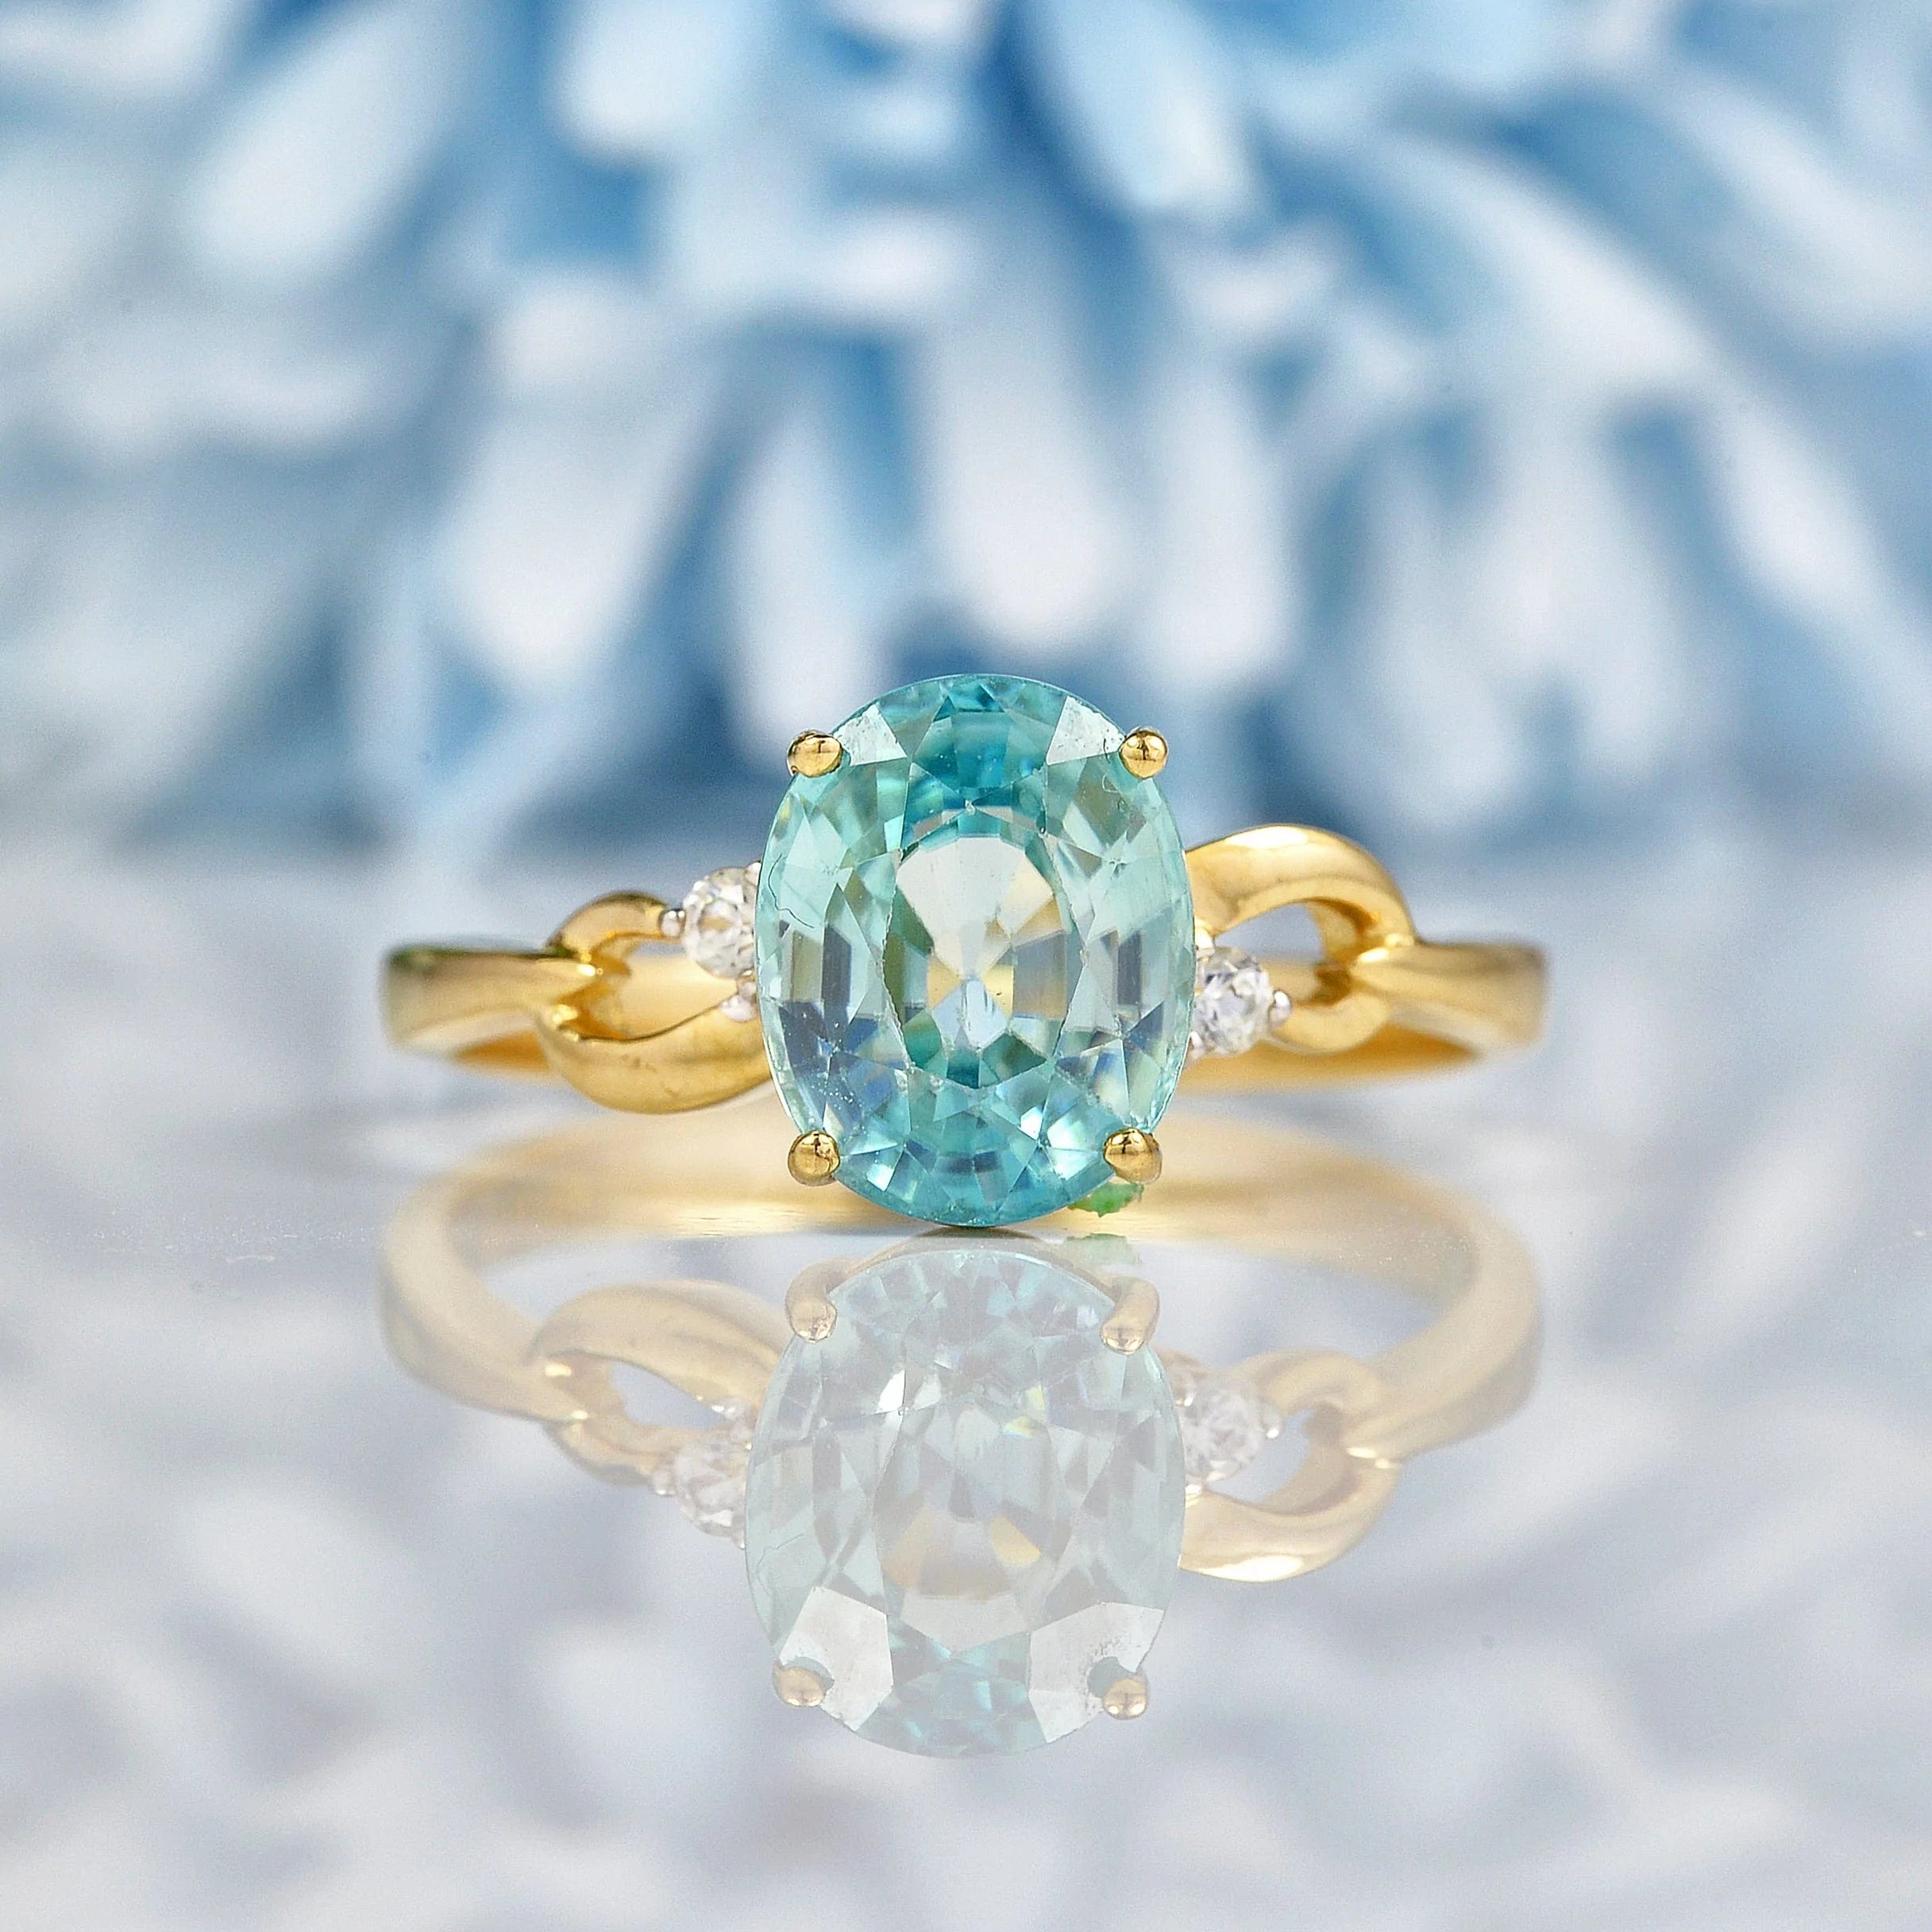 Ellibelle Jewellery Oval Cut Blue Zircon 9ct Yellow Gold Solitaire Ring